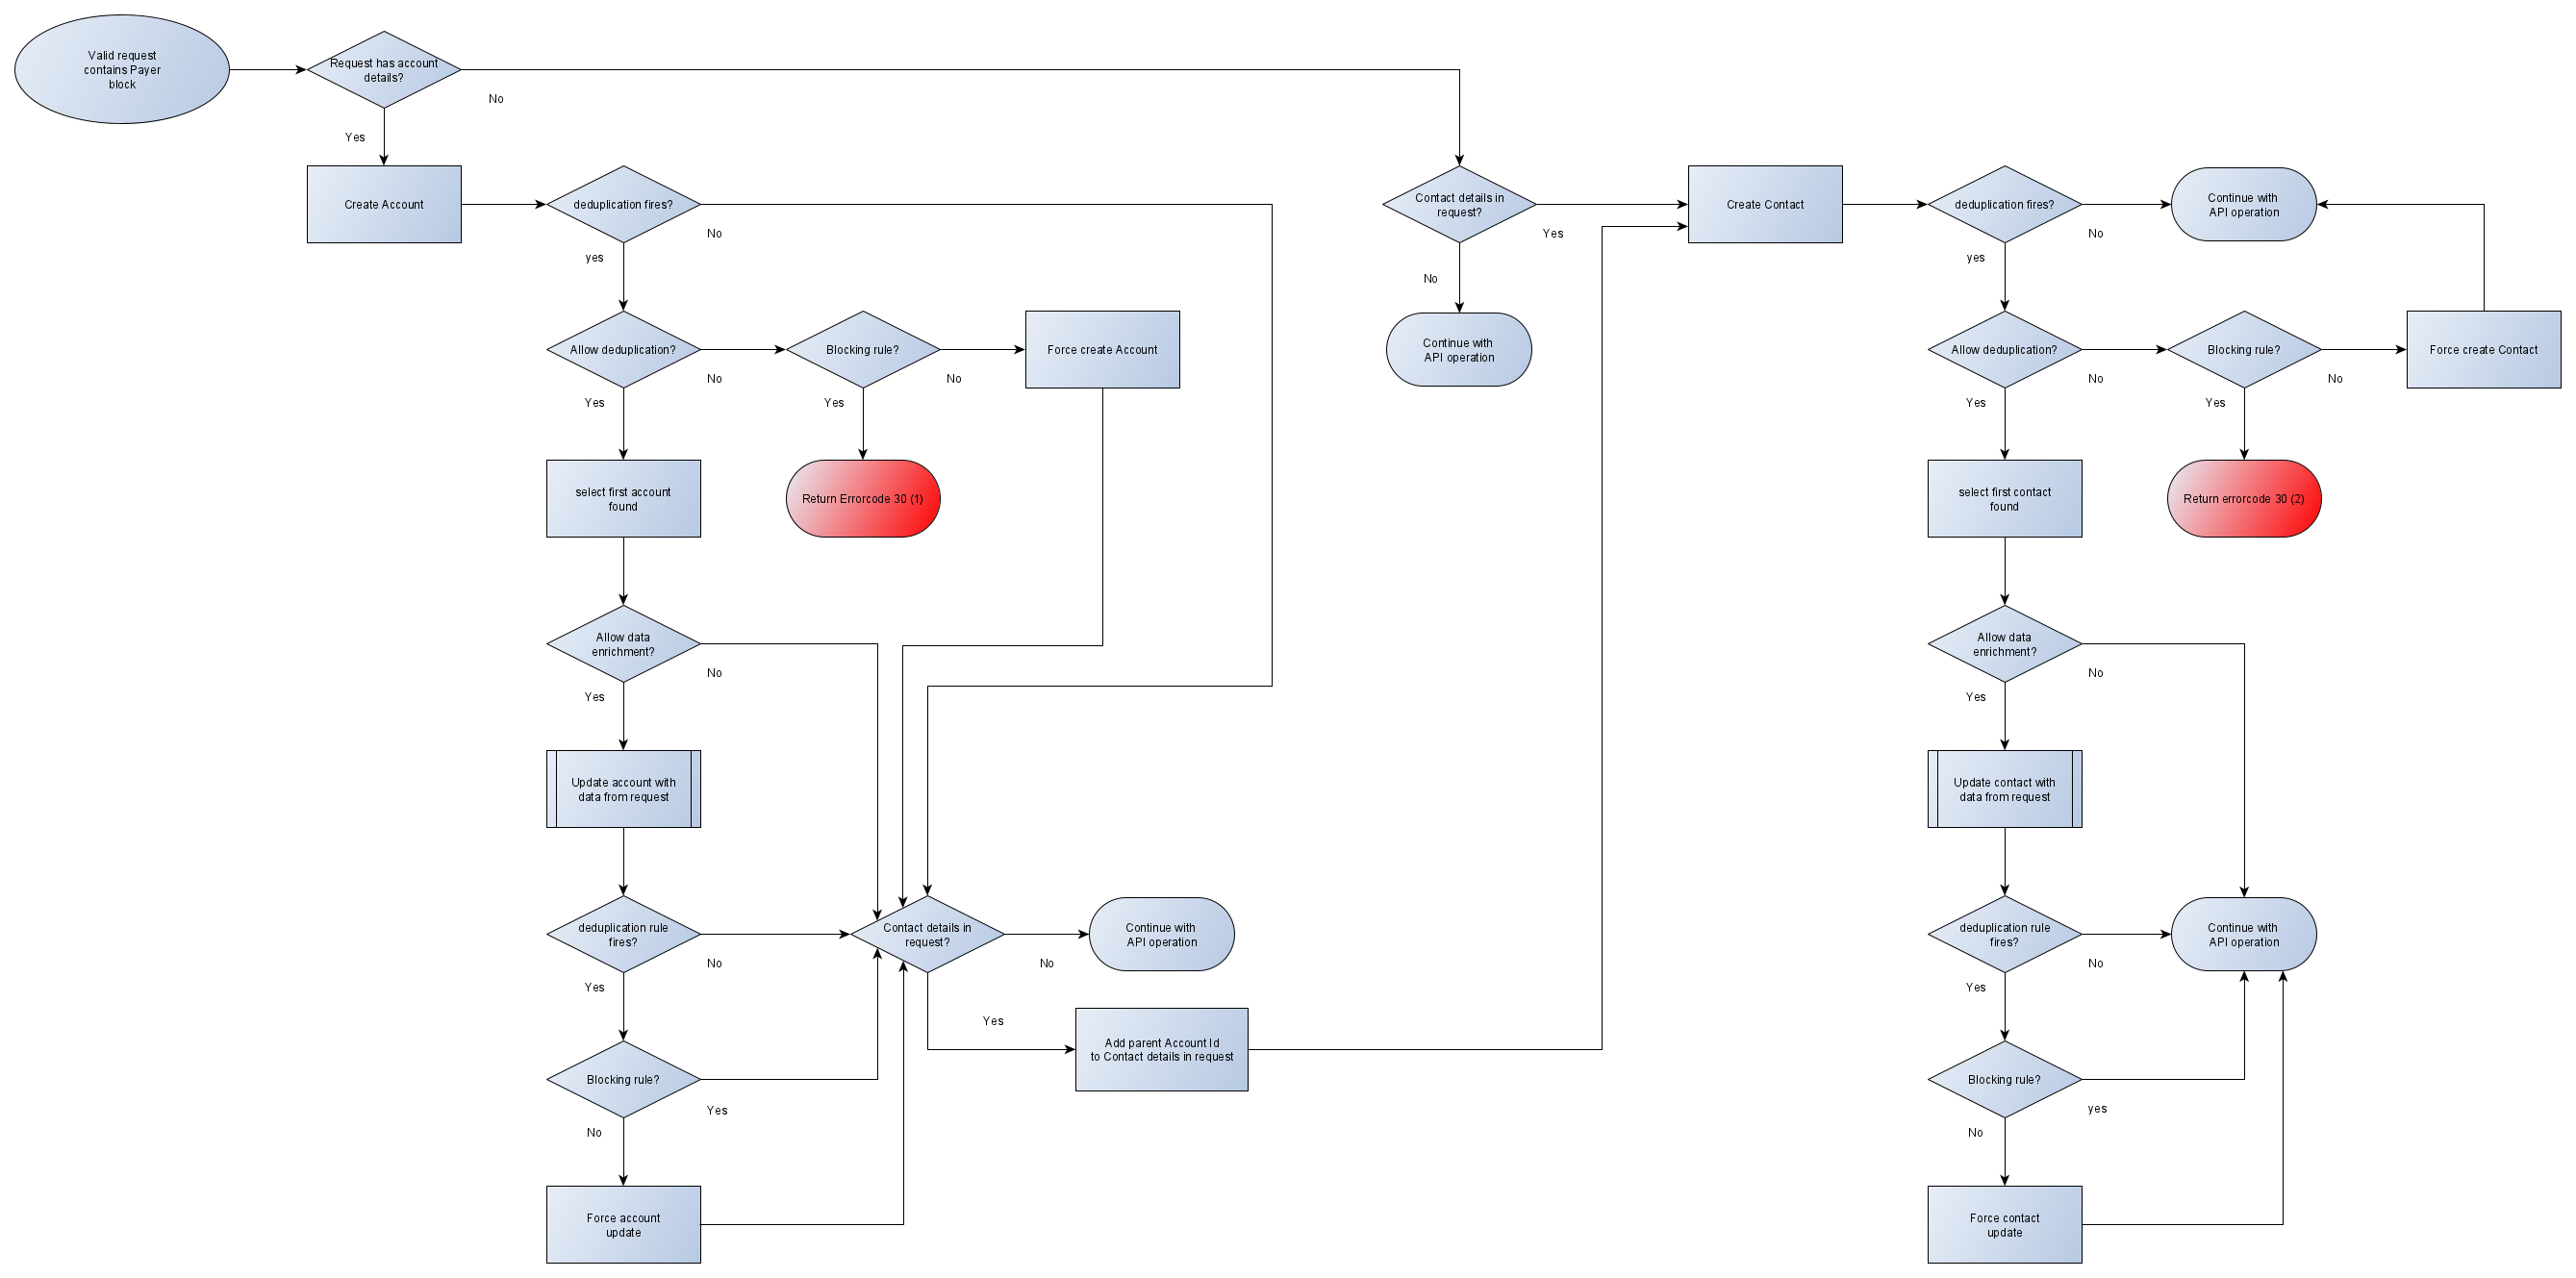 Account and Contact deduplication flow with NPSP or Standalone